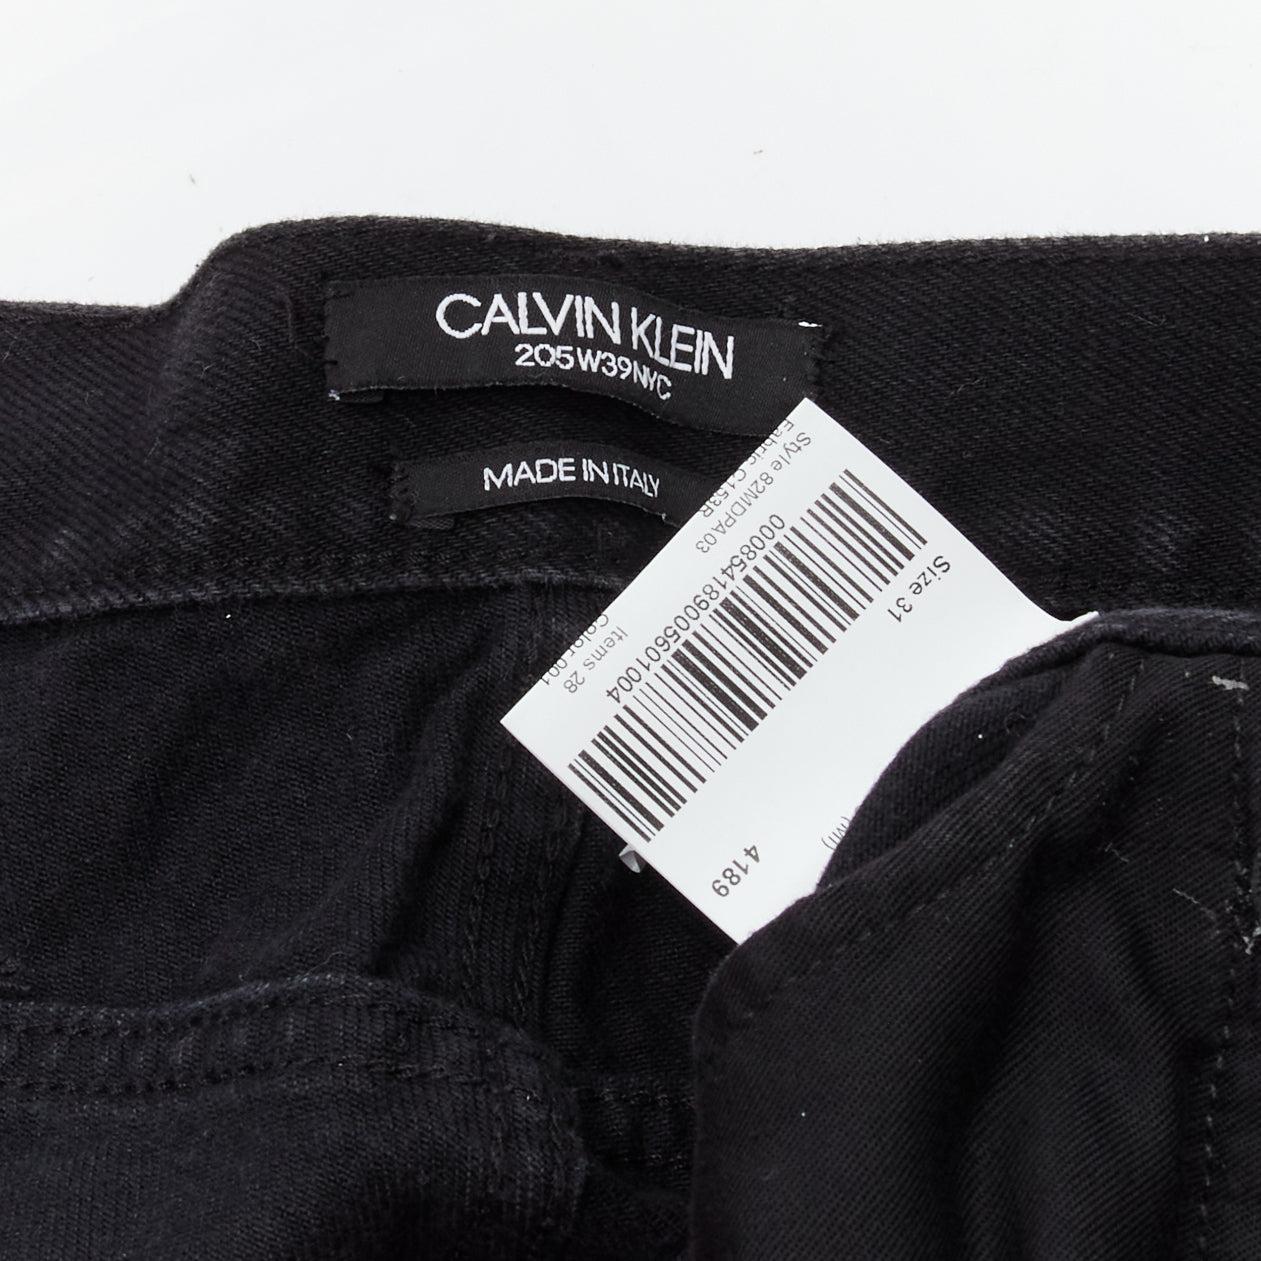 CALVIN KLEIN 205W39NYC Raf Simons black distressed satin patch washed jeans 31